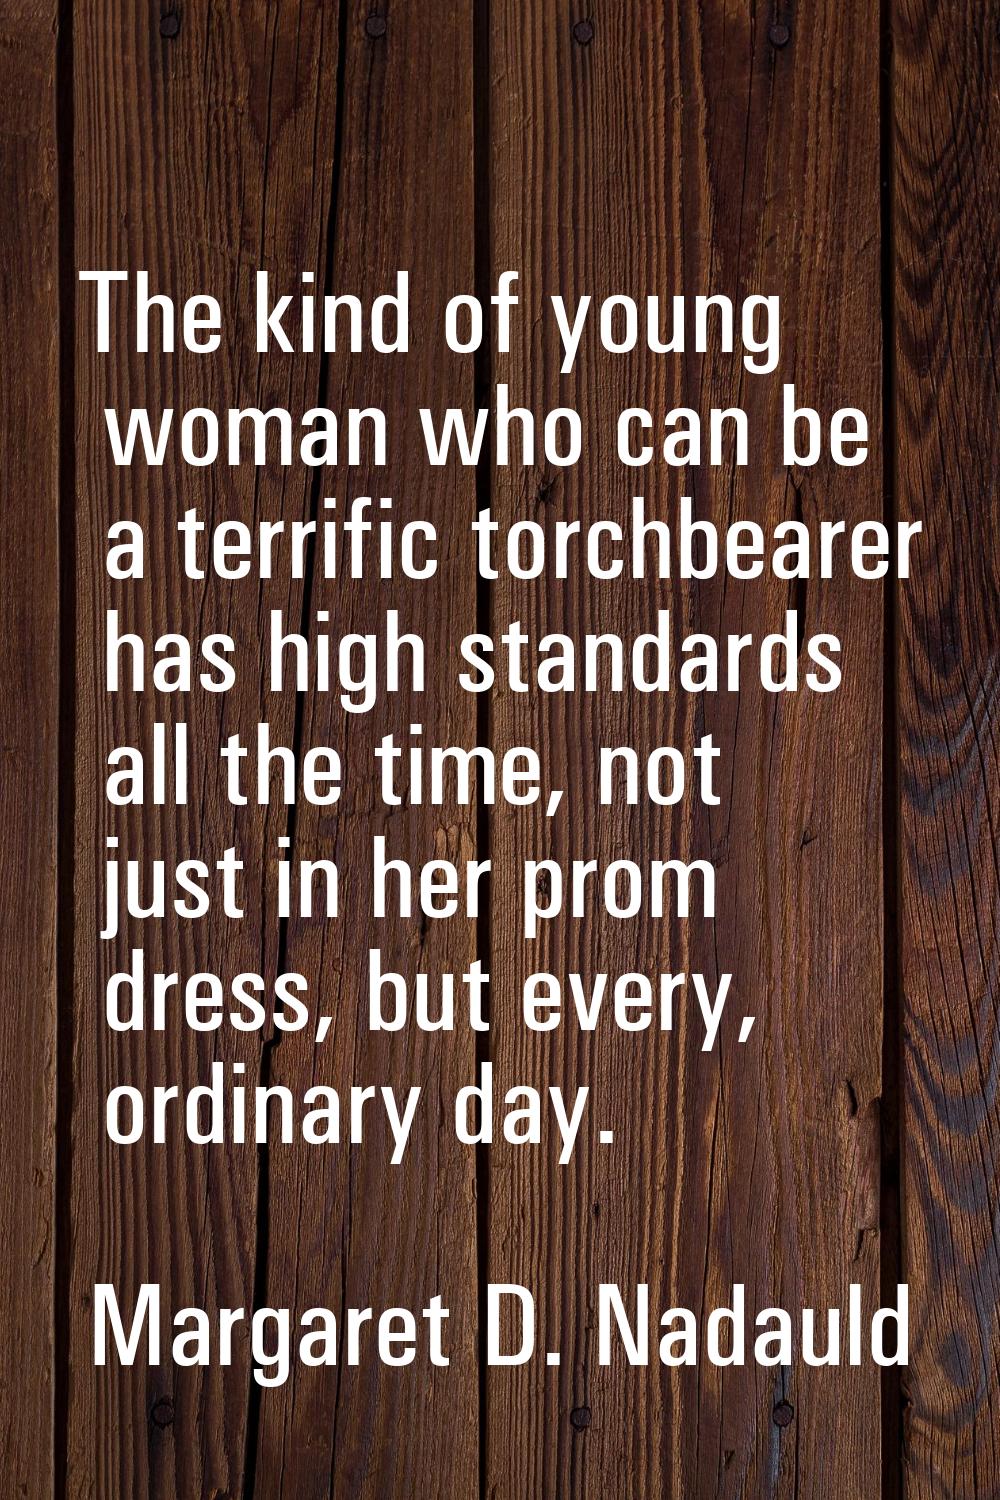 The kind of young woman who can be a terrific torchbearer has high standards all the time, not just